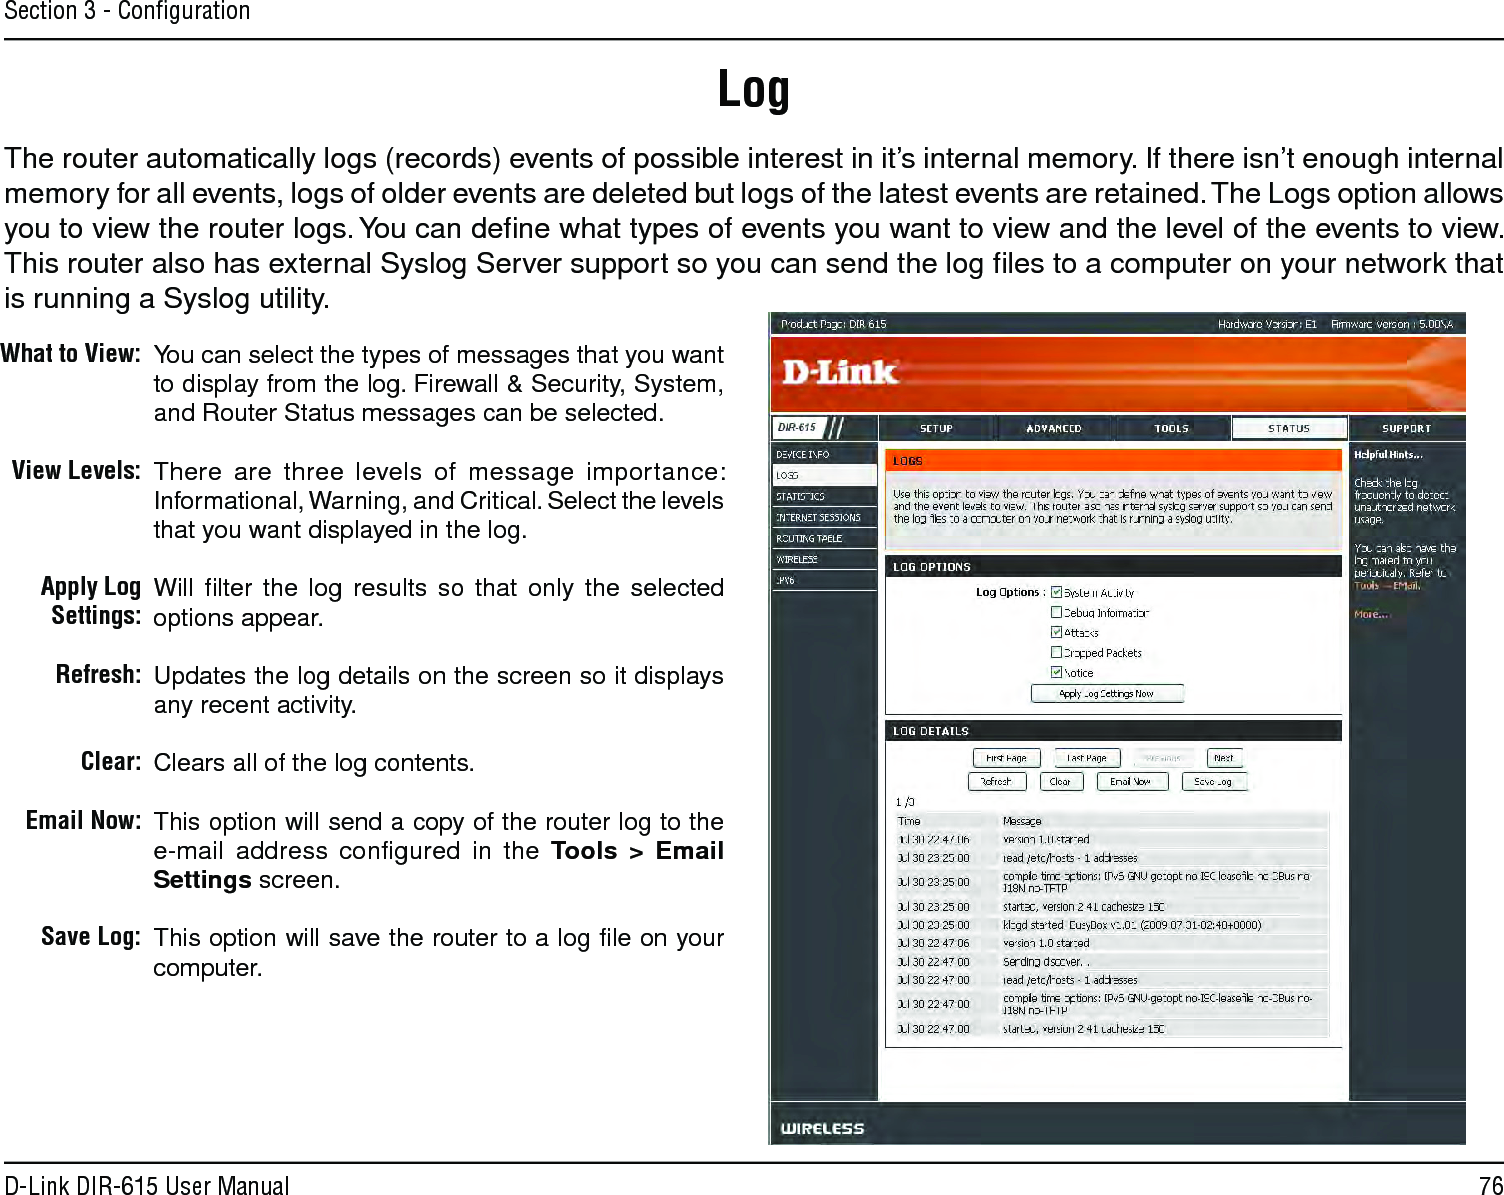 76D-Link DIR-615 User ManualSection 3 - ConﬁgurationLogWhat to View:View Levels:Apply Log Settings:Refresh:Clear:Email Now:Save Log:You can select the types of messages that you want to display from the log. Firewall &amp; Security, System, and Router Status messages can be selected.There are three levels of message importance: Informational, Warning, and Critical. Select the levels that you want displayed in the log.Will ﬁlter the log results so that only the selected options appear.Updates the log details on the screen so it displays any recent activity.Clears all of the log contents.This option will send a copy of the router log to the e-mail address conﬁgured in the Tools &gt; Email Settings screen.This option will save the router to a log ﬁle on your computer.The router automatically logs (records) events of possible interest in it’s internal memory. If there isn’t enough internal memory for all events, logs of older events are deleted but logs of the latest events are retained. The Logs option allows you to view the router logs. You can deﬁne what types of events you want to view and the level of the events to view. This router also has external Syslog Server support so you can send the log ﬁles to a computer on your network that is running a Syslog utility.